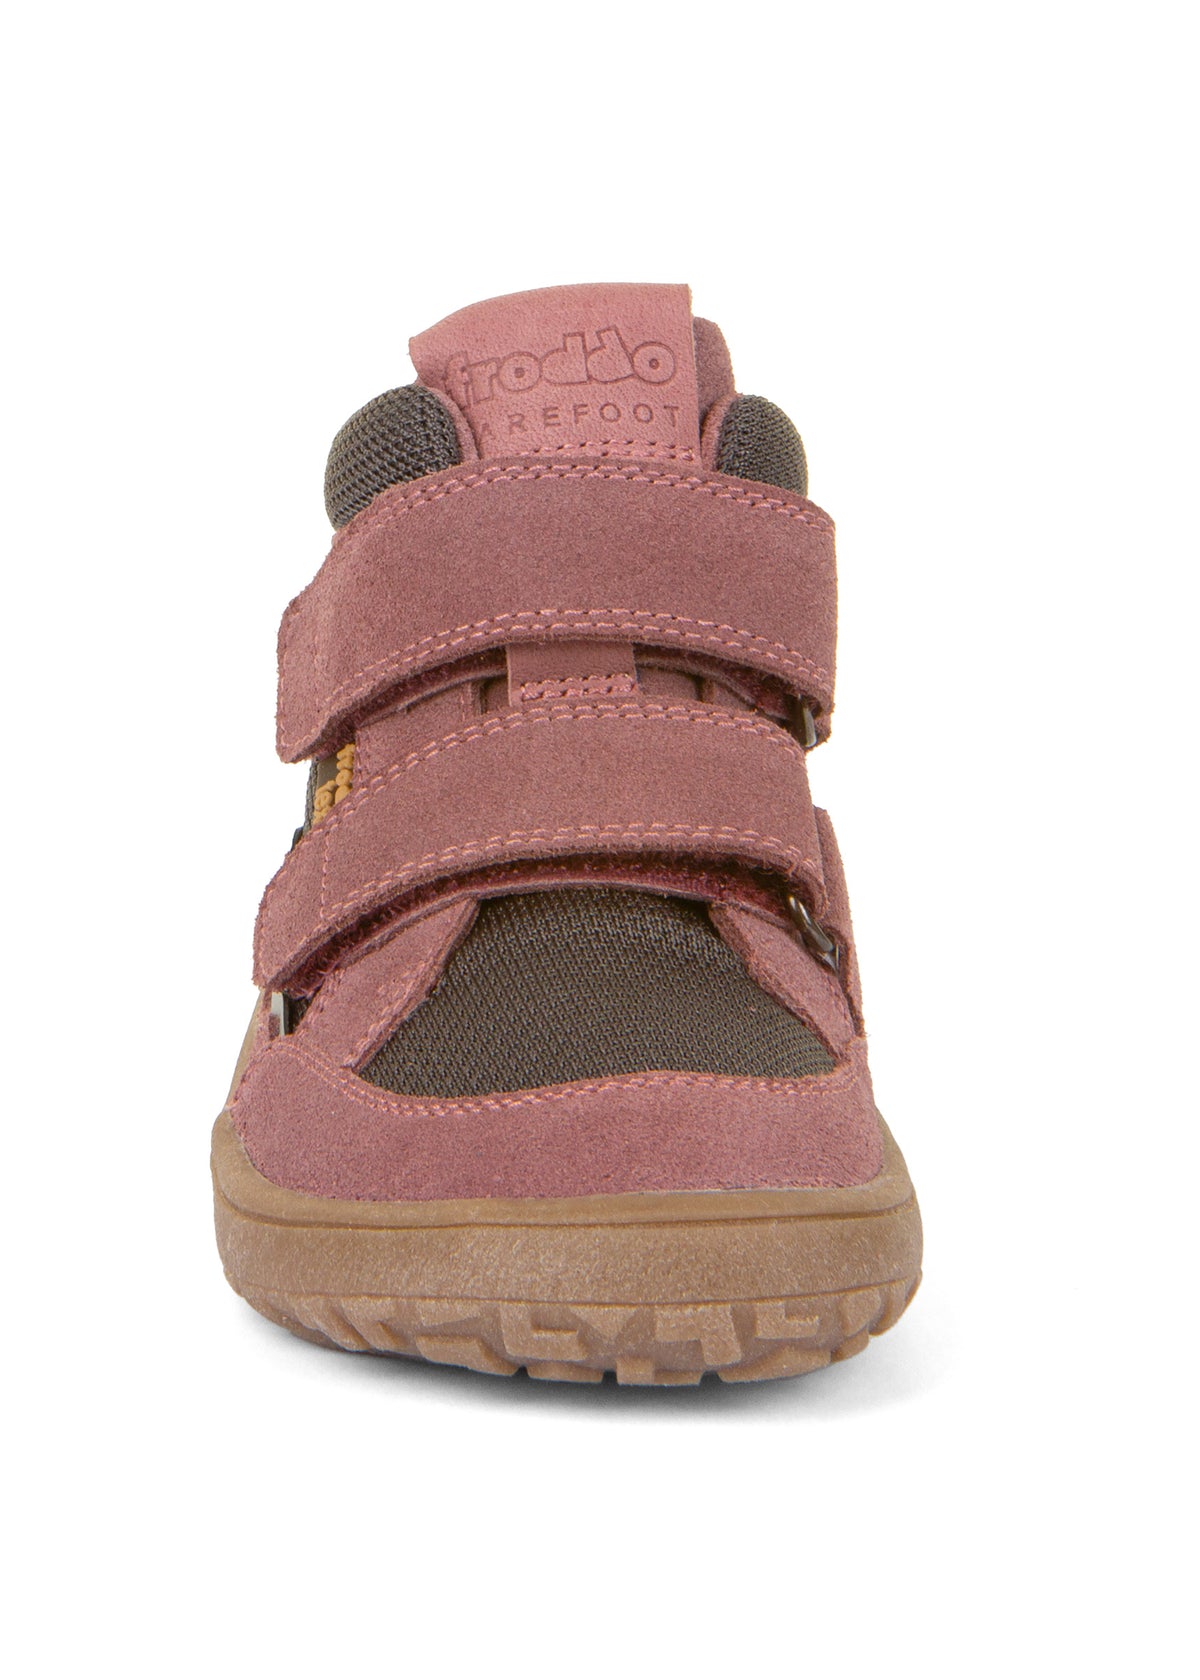 Barefoot sneakers with handles - mid-season shoes, Autumn-TEX, pink